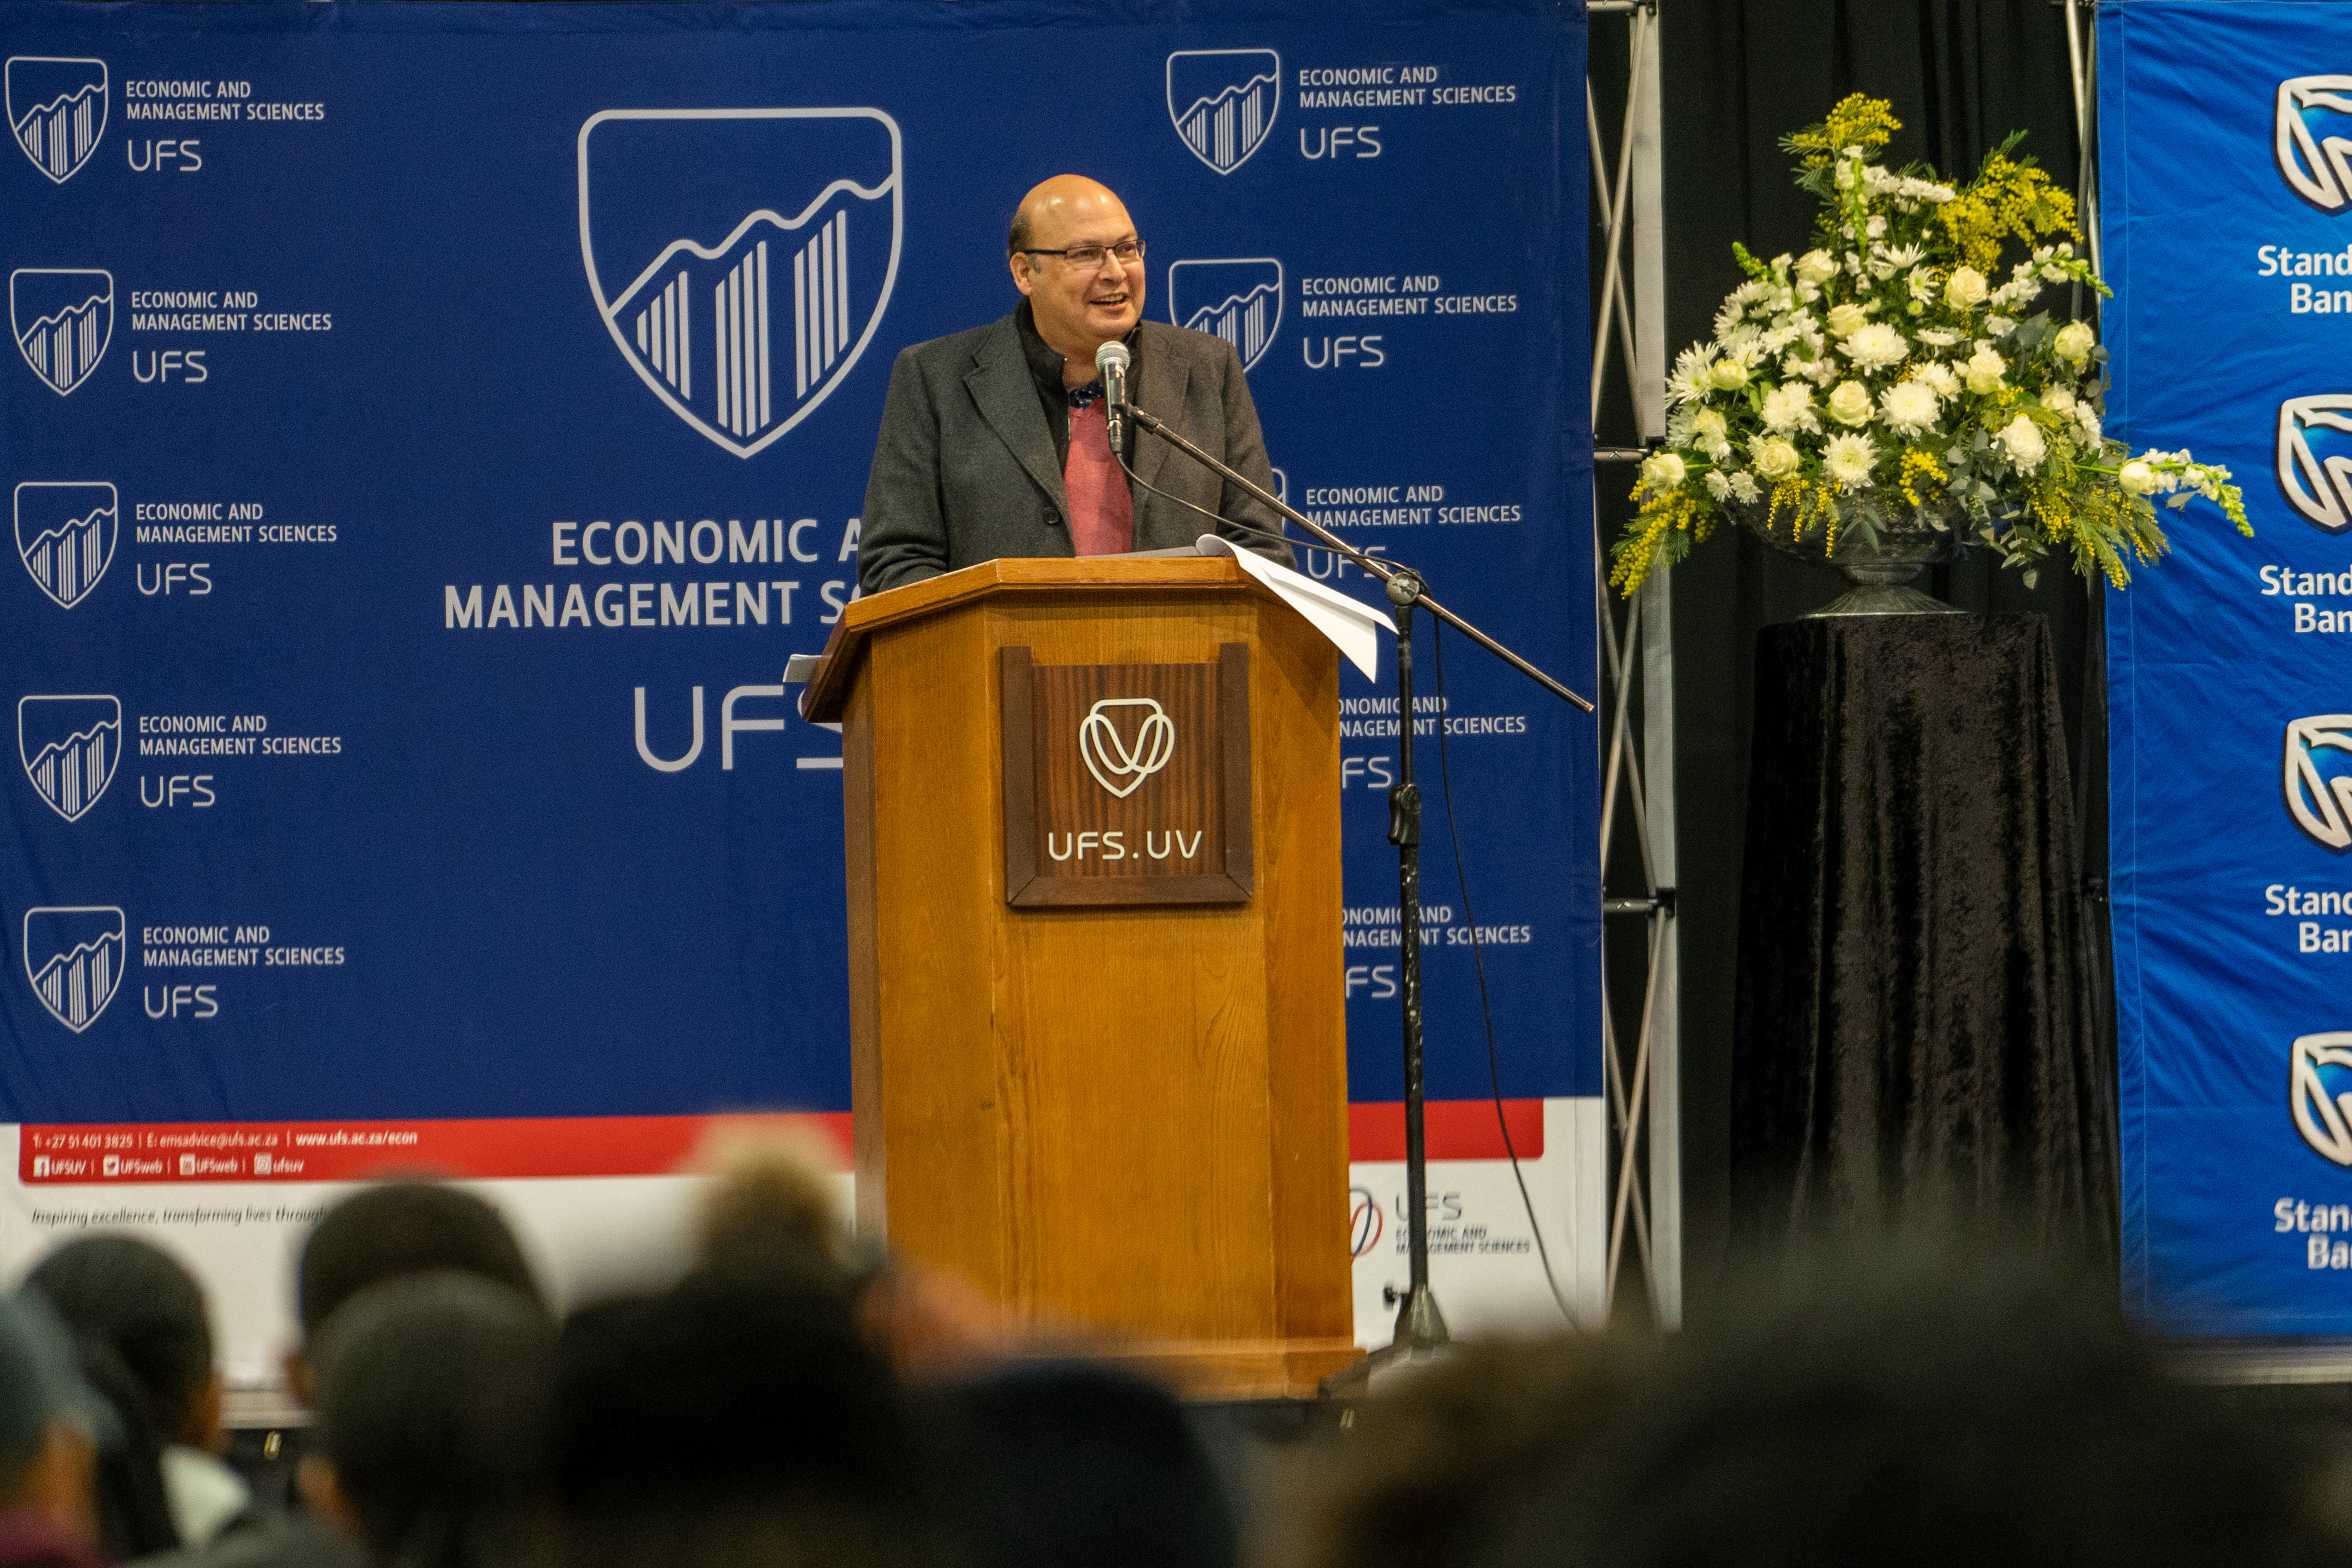 Prof Frans Prinsloo, Director of the School of Accountancy, welcomed guests, partners, and students to the event.